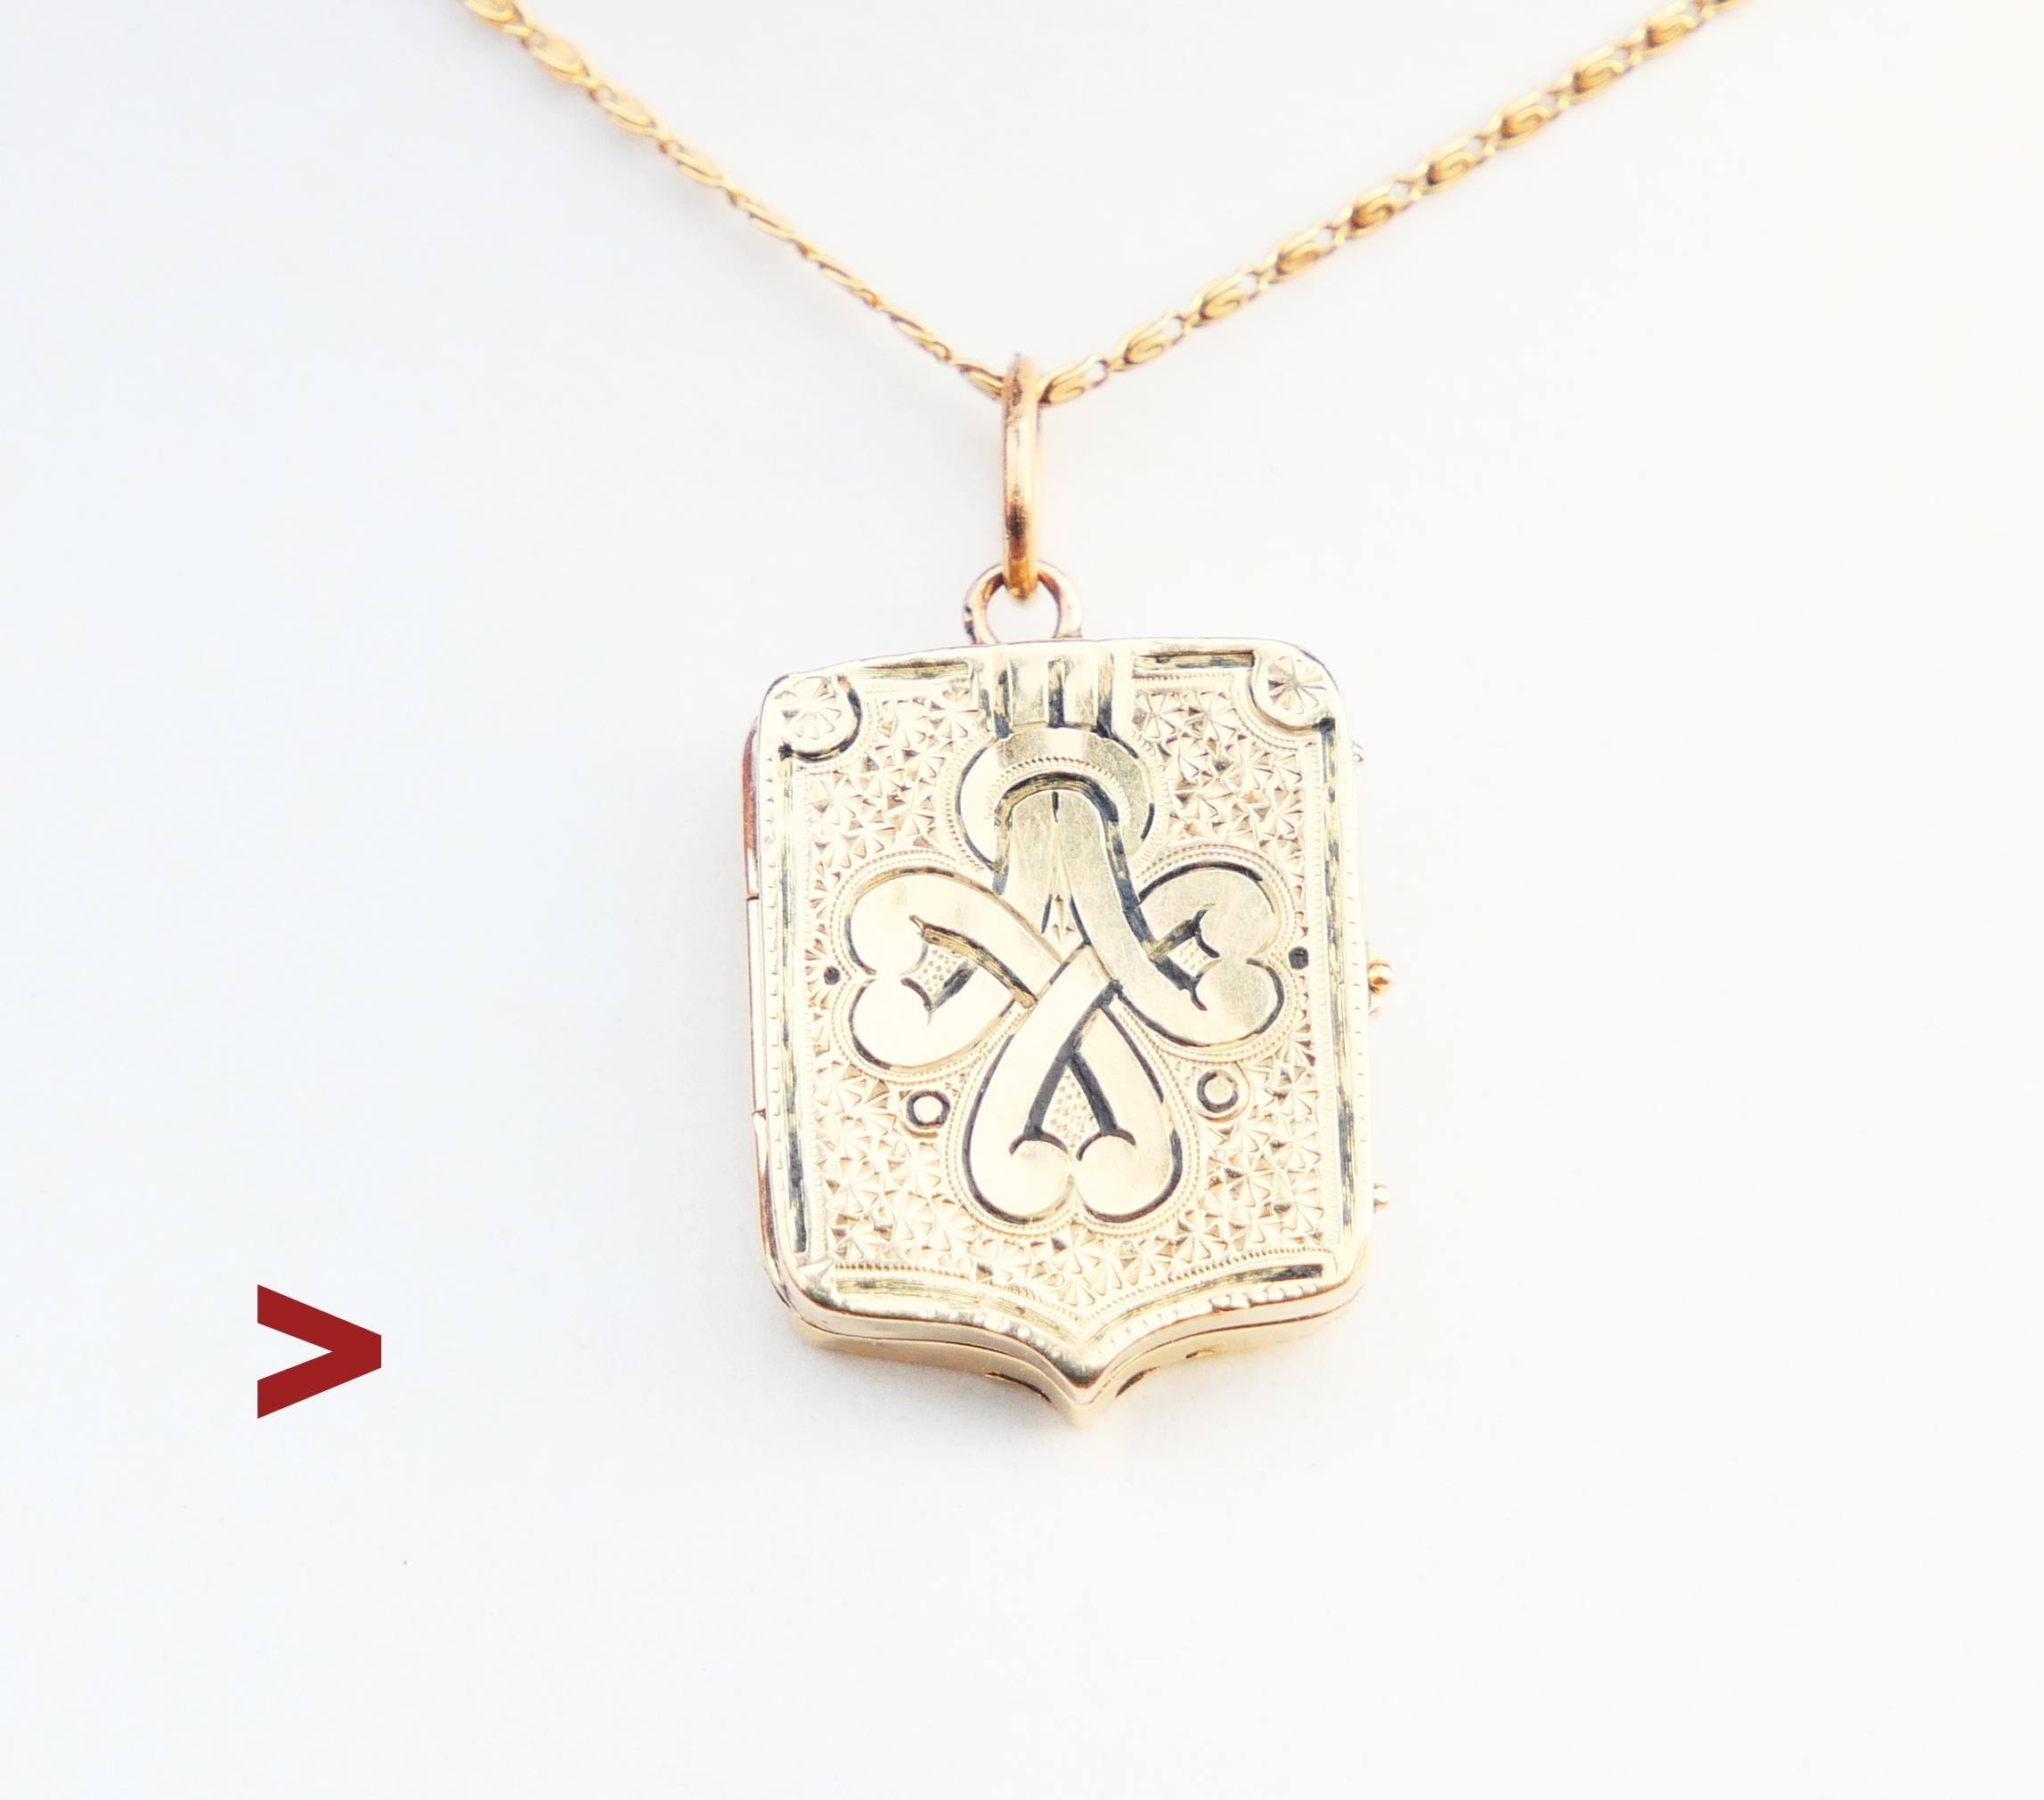 Antique Danish Pendant / Locket made of solid 18K Yellow Gold. Detailed hand hammered and engraved ornament of Eternity Knot in miniature proportions on frontal side. Traces of black Enamel. Protruding nail catchers on both halves.

Not hallmarked ,